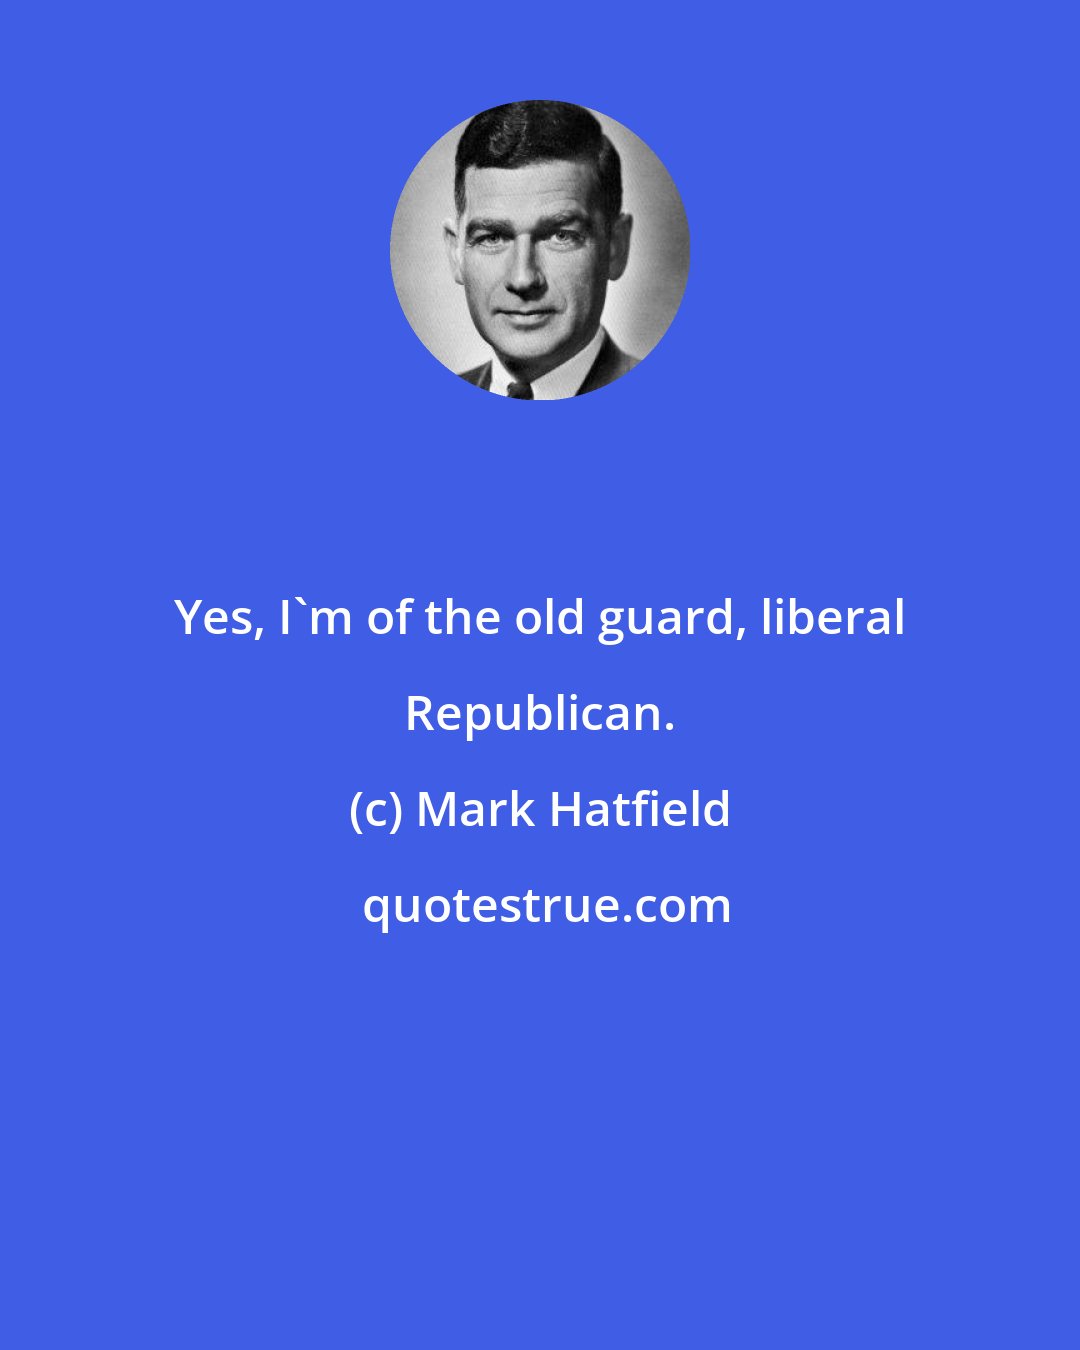 Mark Hatfield: Yes, I'm of the old guard, liberal Republican.